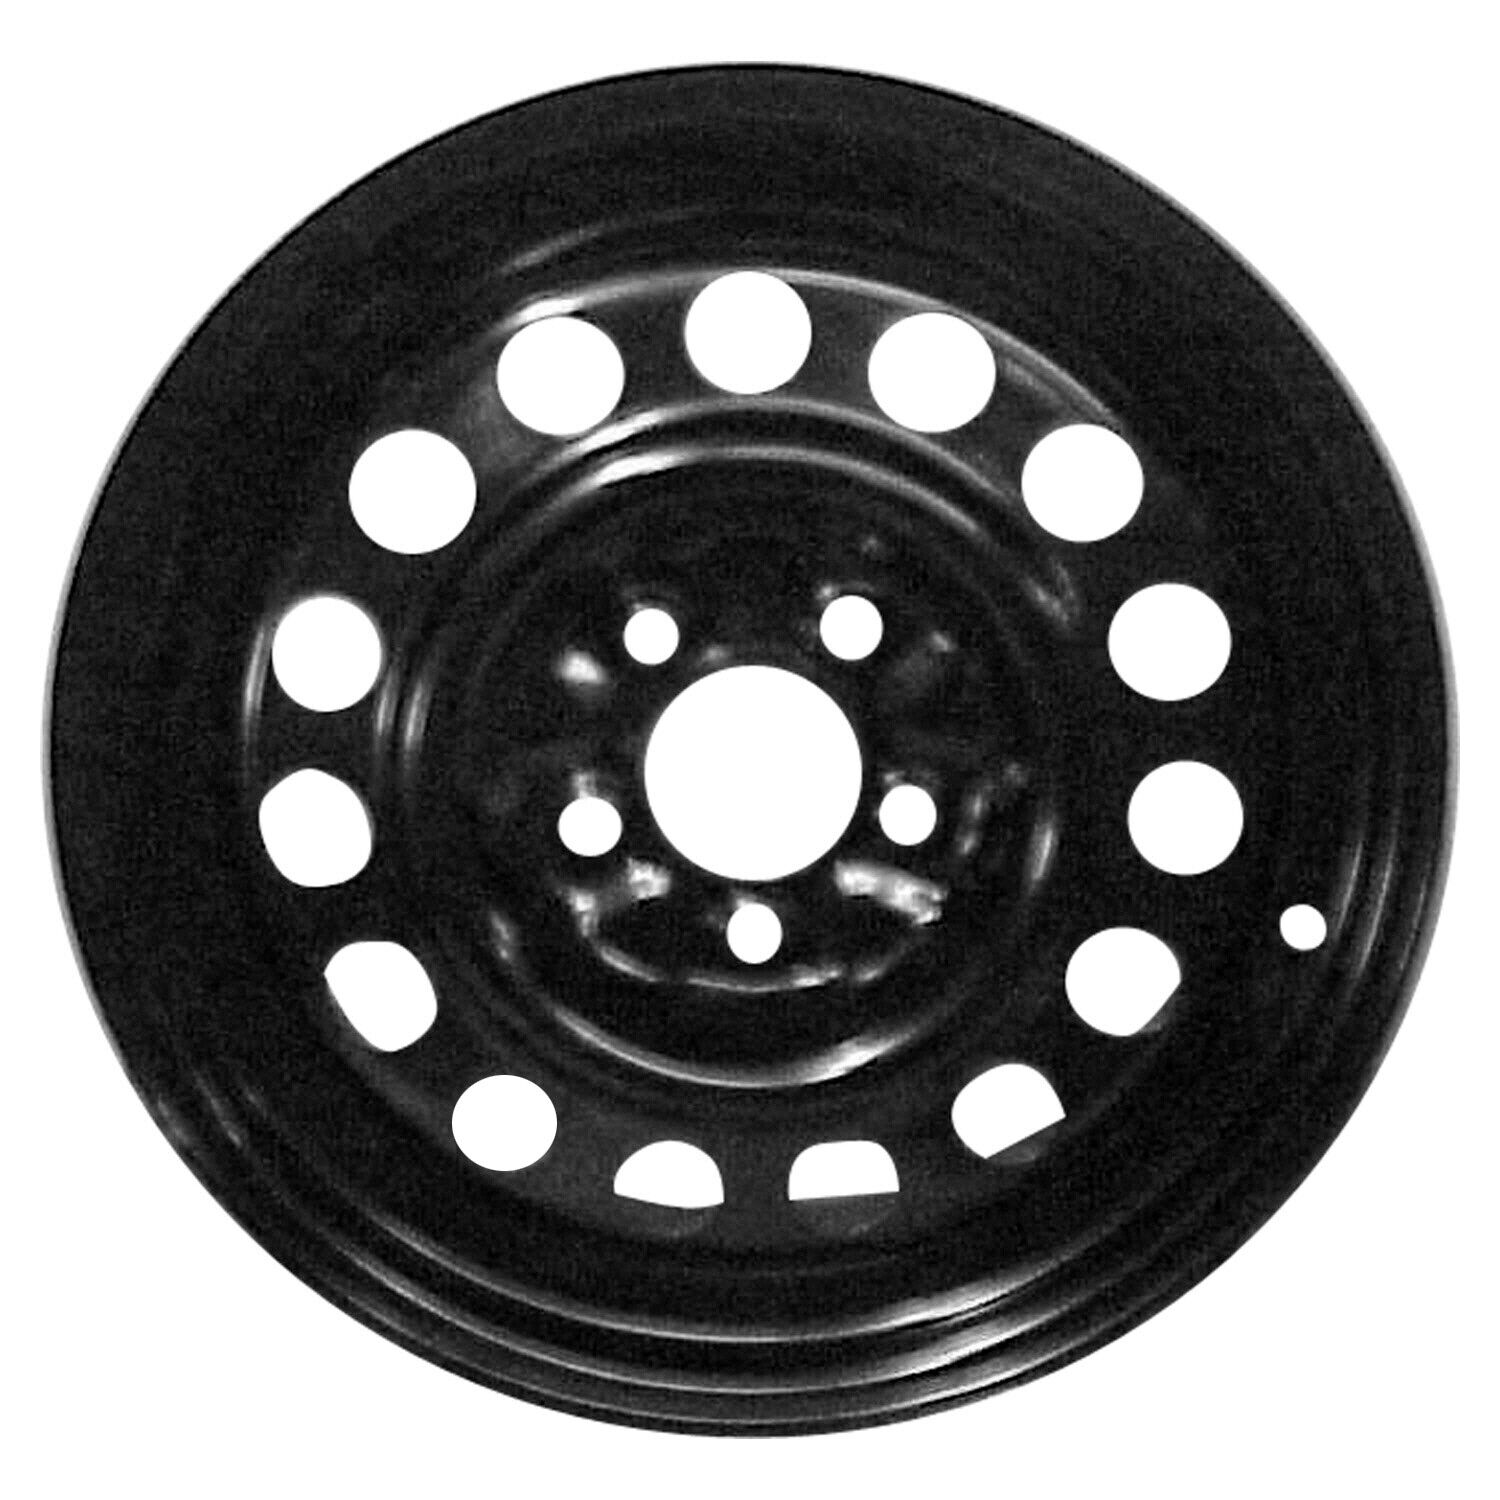 08065 Refinished OEM Wheel Steel Fits 2005-2007 Buick Rendezvous Painted Black